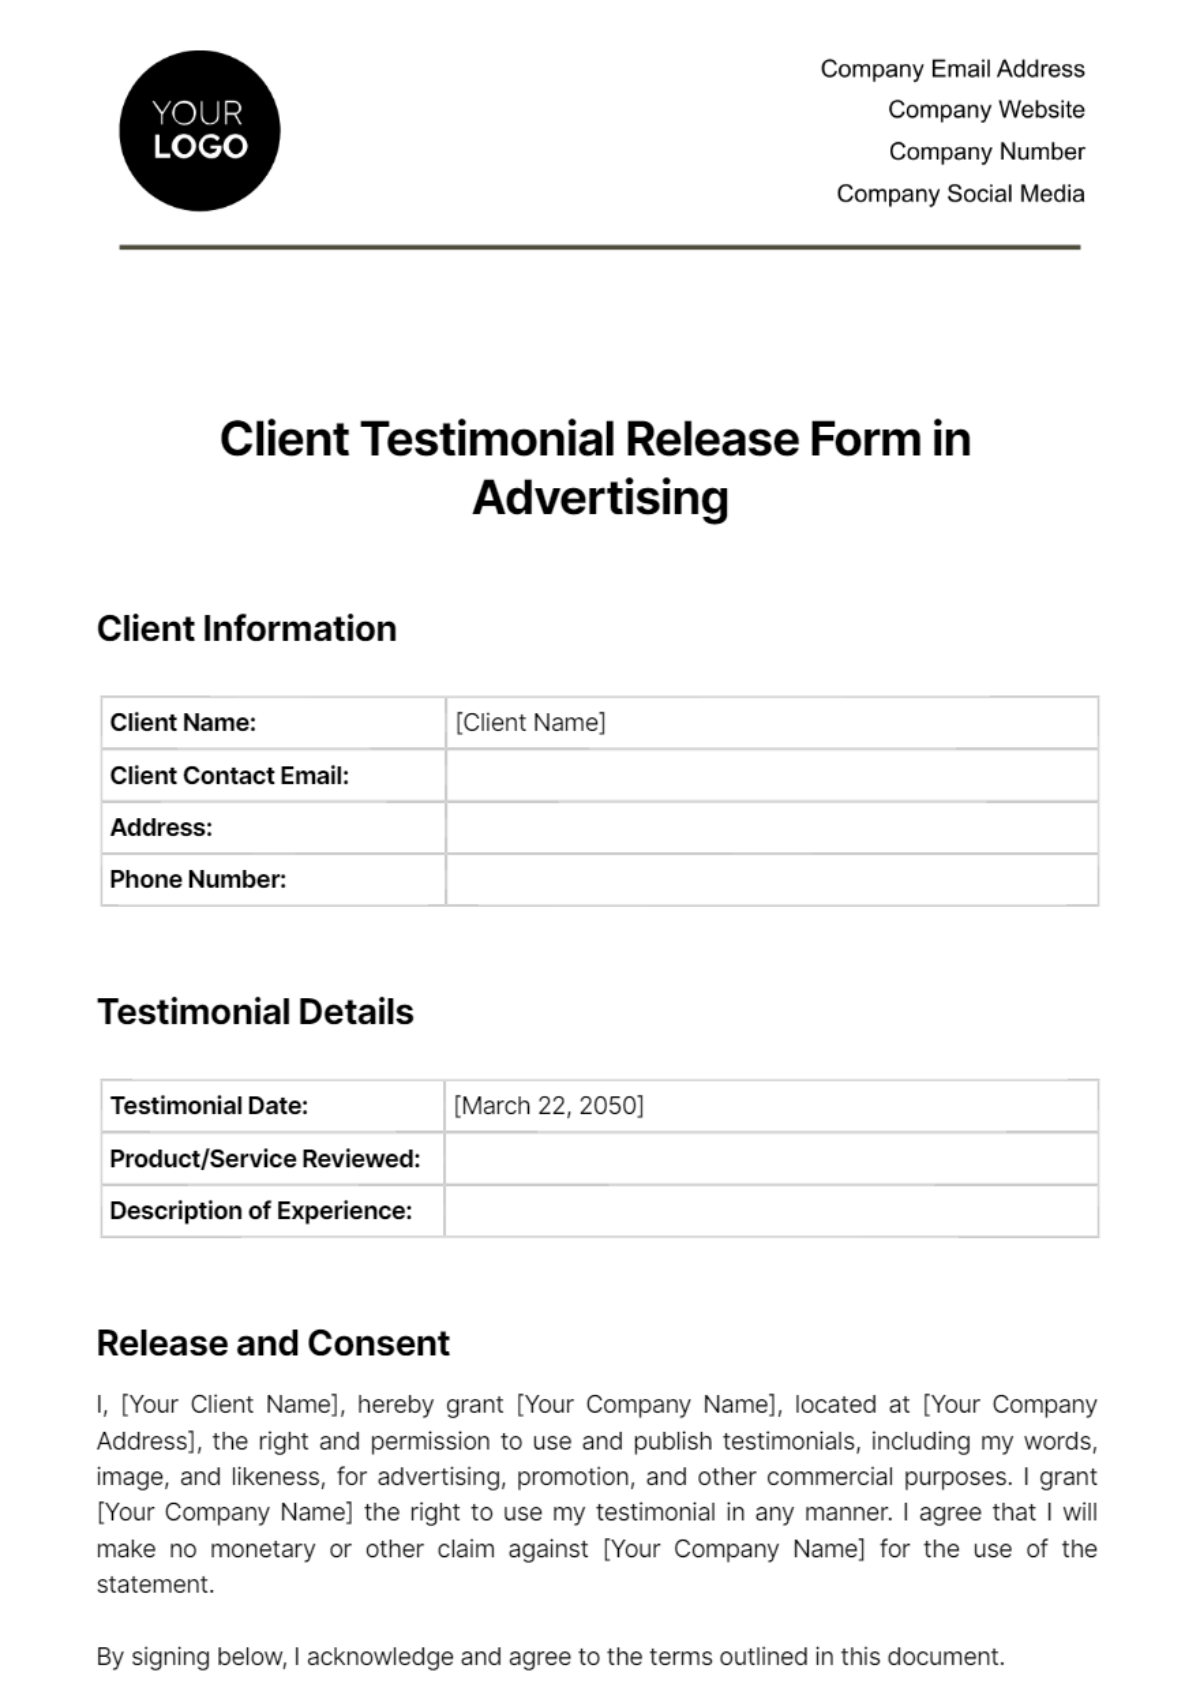 Client Testimonial Release Form in Advertising Template